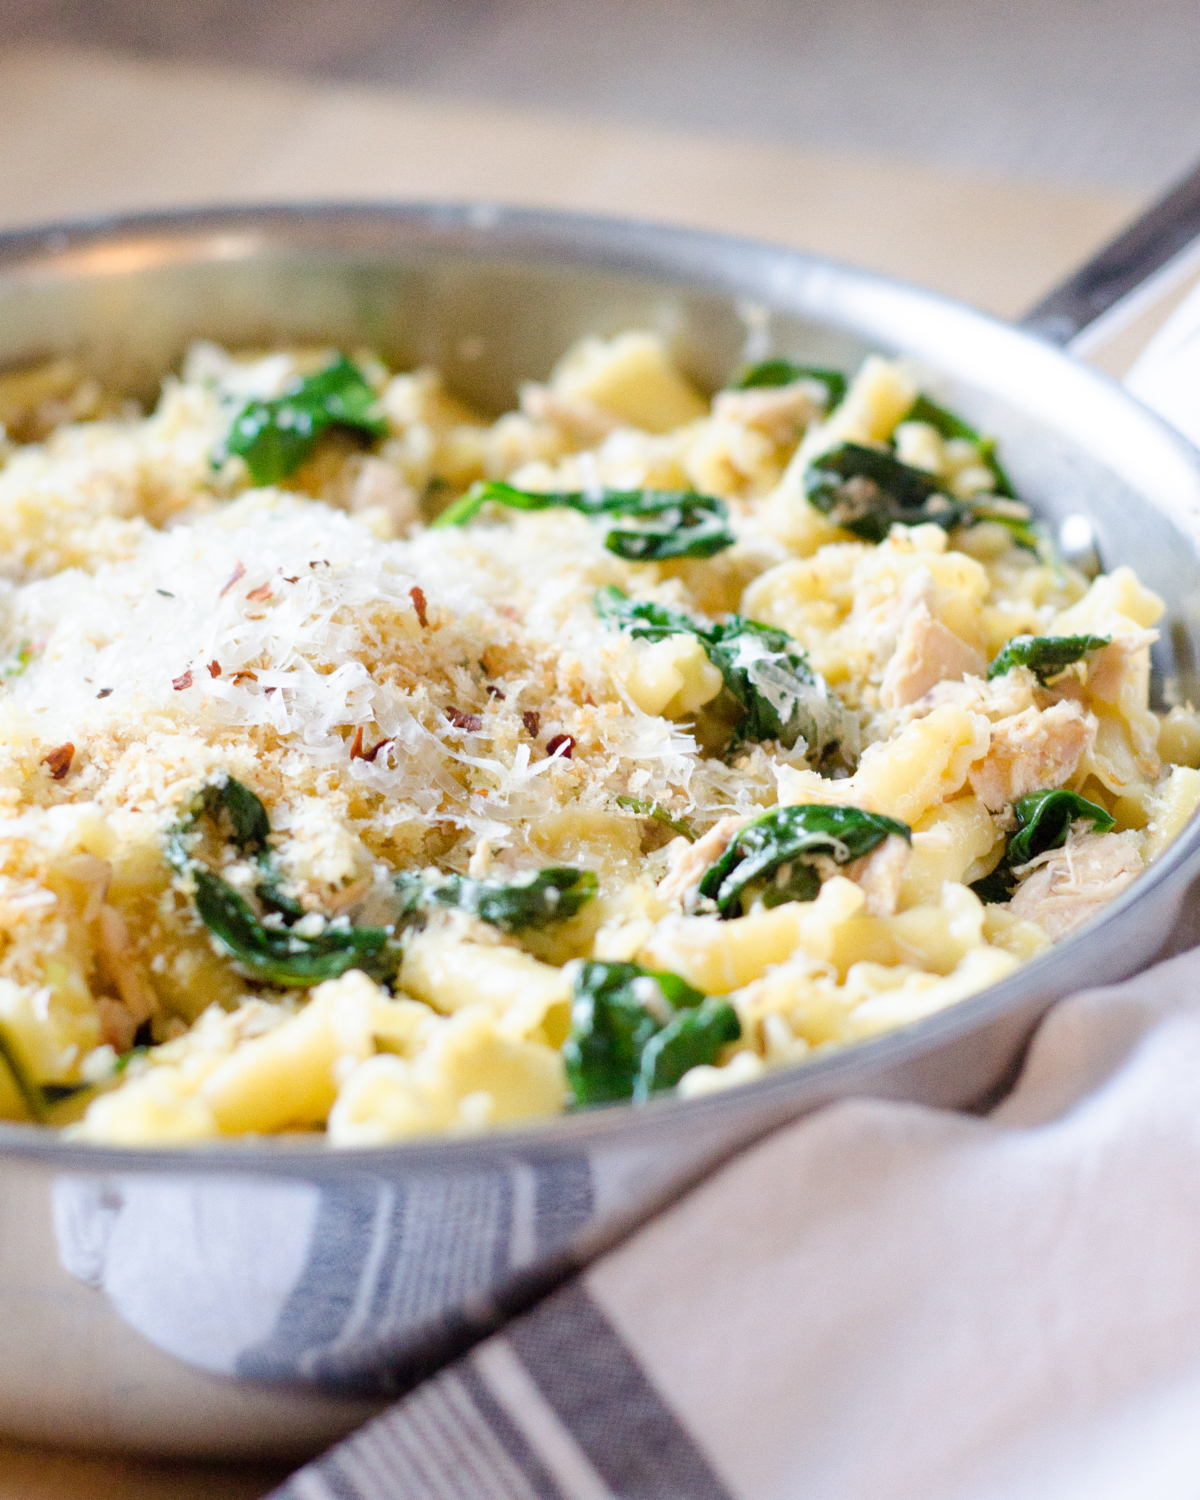 A tuna pasta recipe with spinach and lemon that's ready in about 20 minutes and is made mostly with pantry items. Light and flavorful, this is NOT your grandmother's tuna noodle casserole!